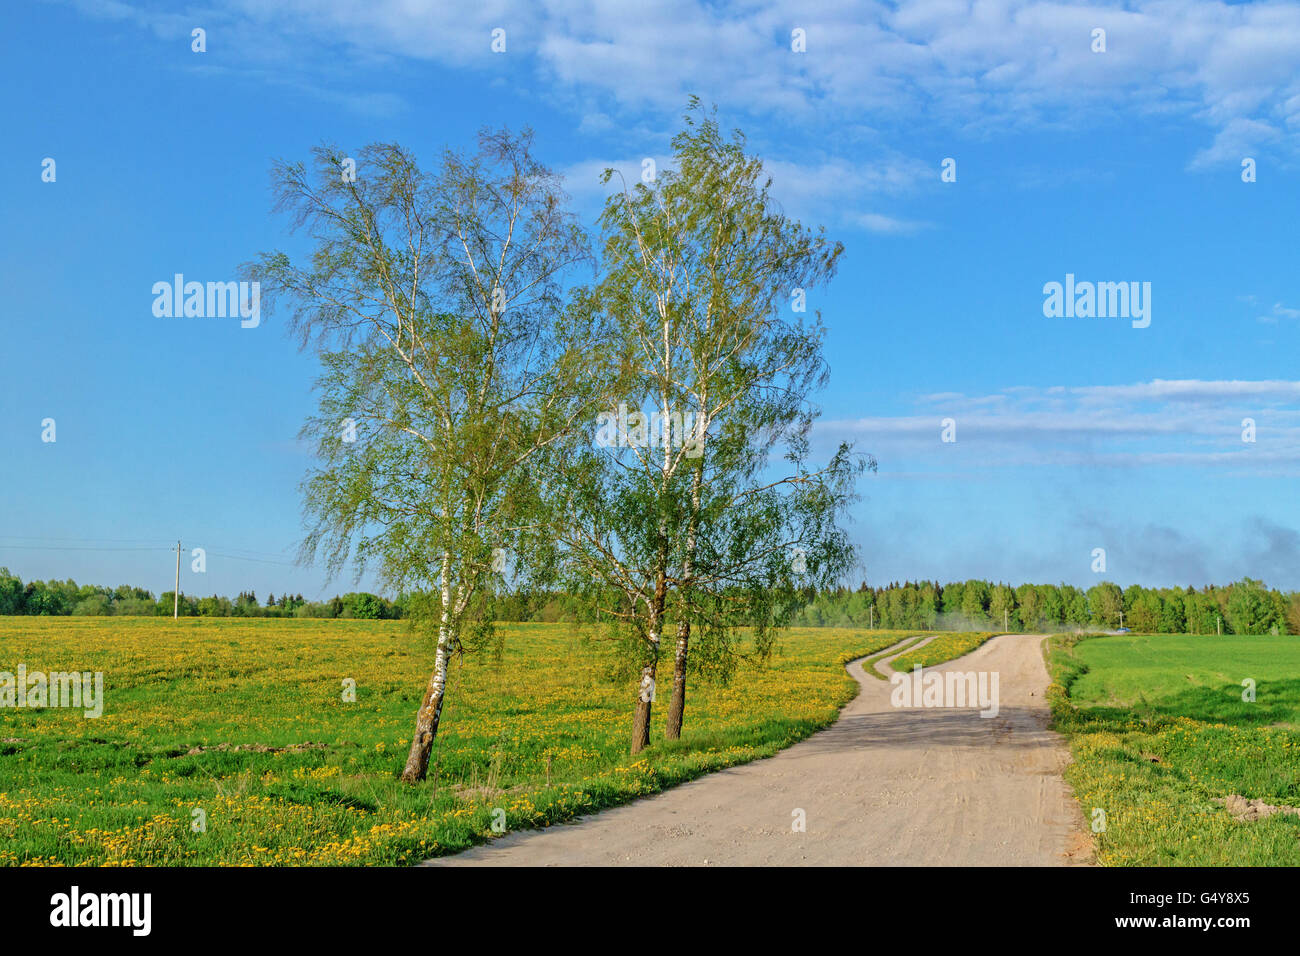 Ground road through agricultural fields.Along the road lonely trees and  green grass fields. Stock Photo